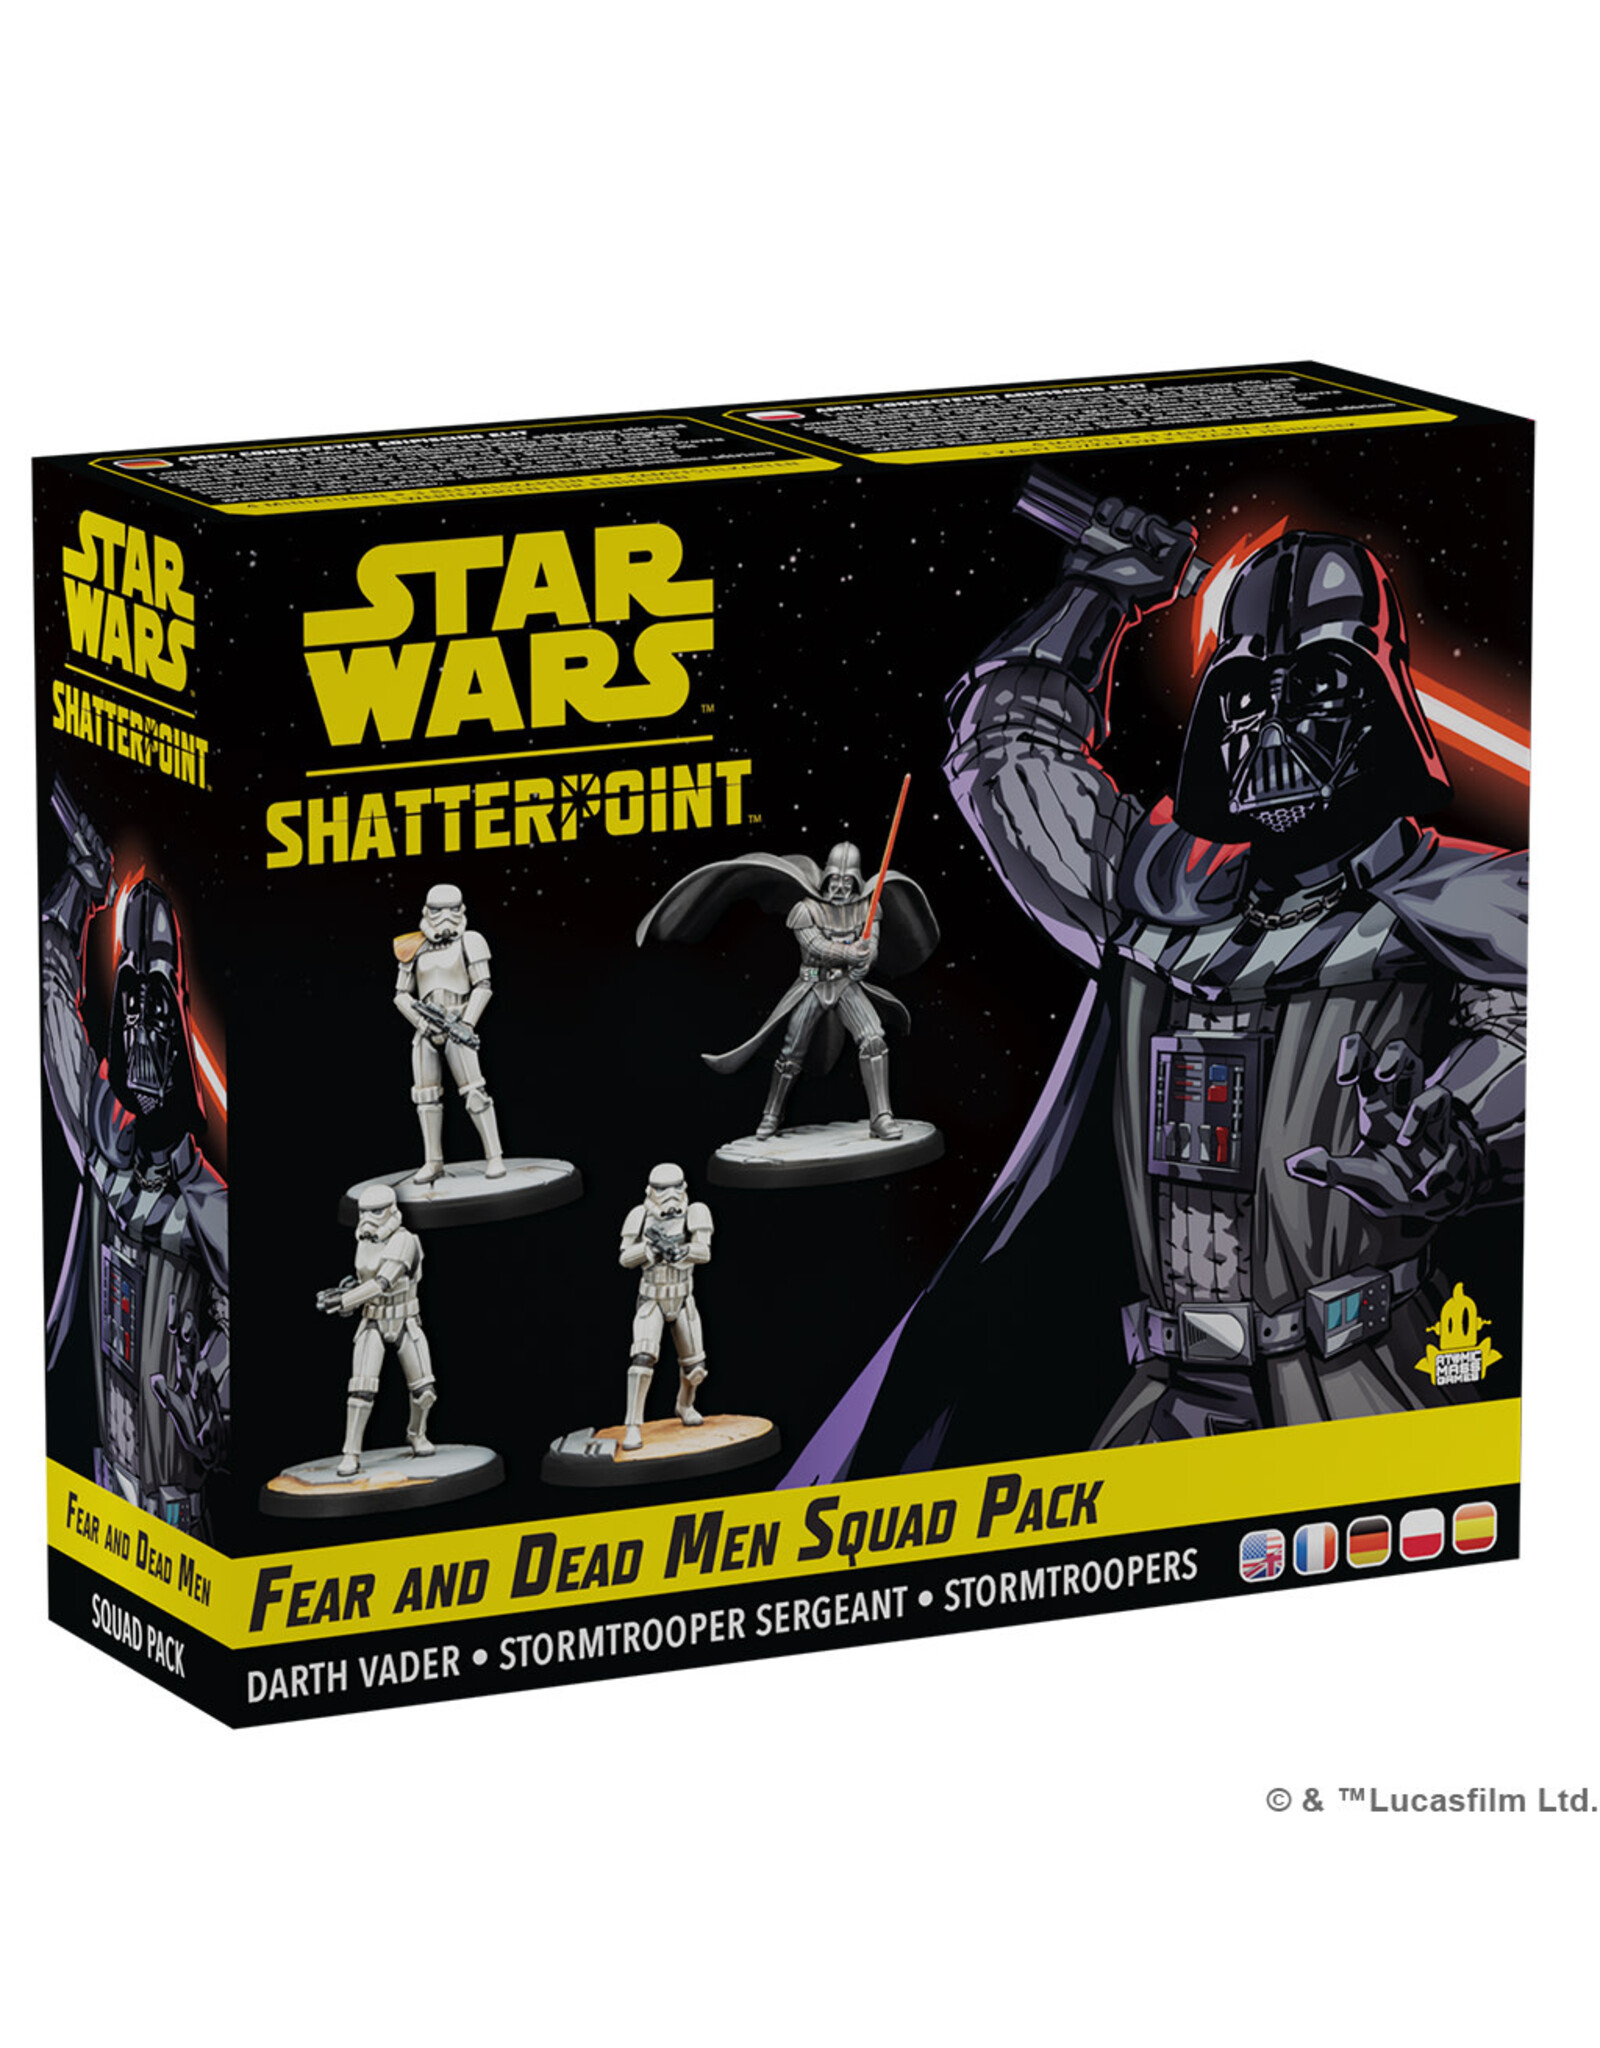 Star Wars Shatterpoint Star Wars Shatterpoint Fear and Dead Men Squad Pack